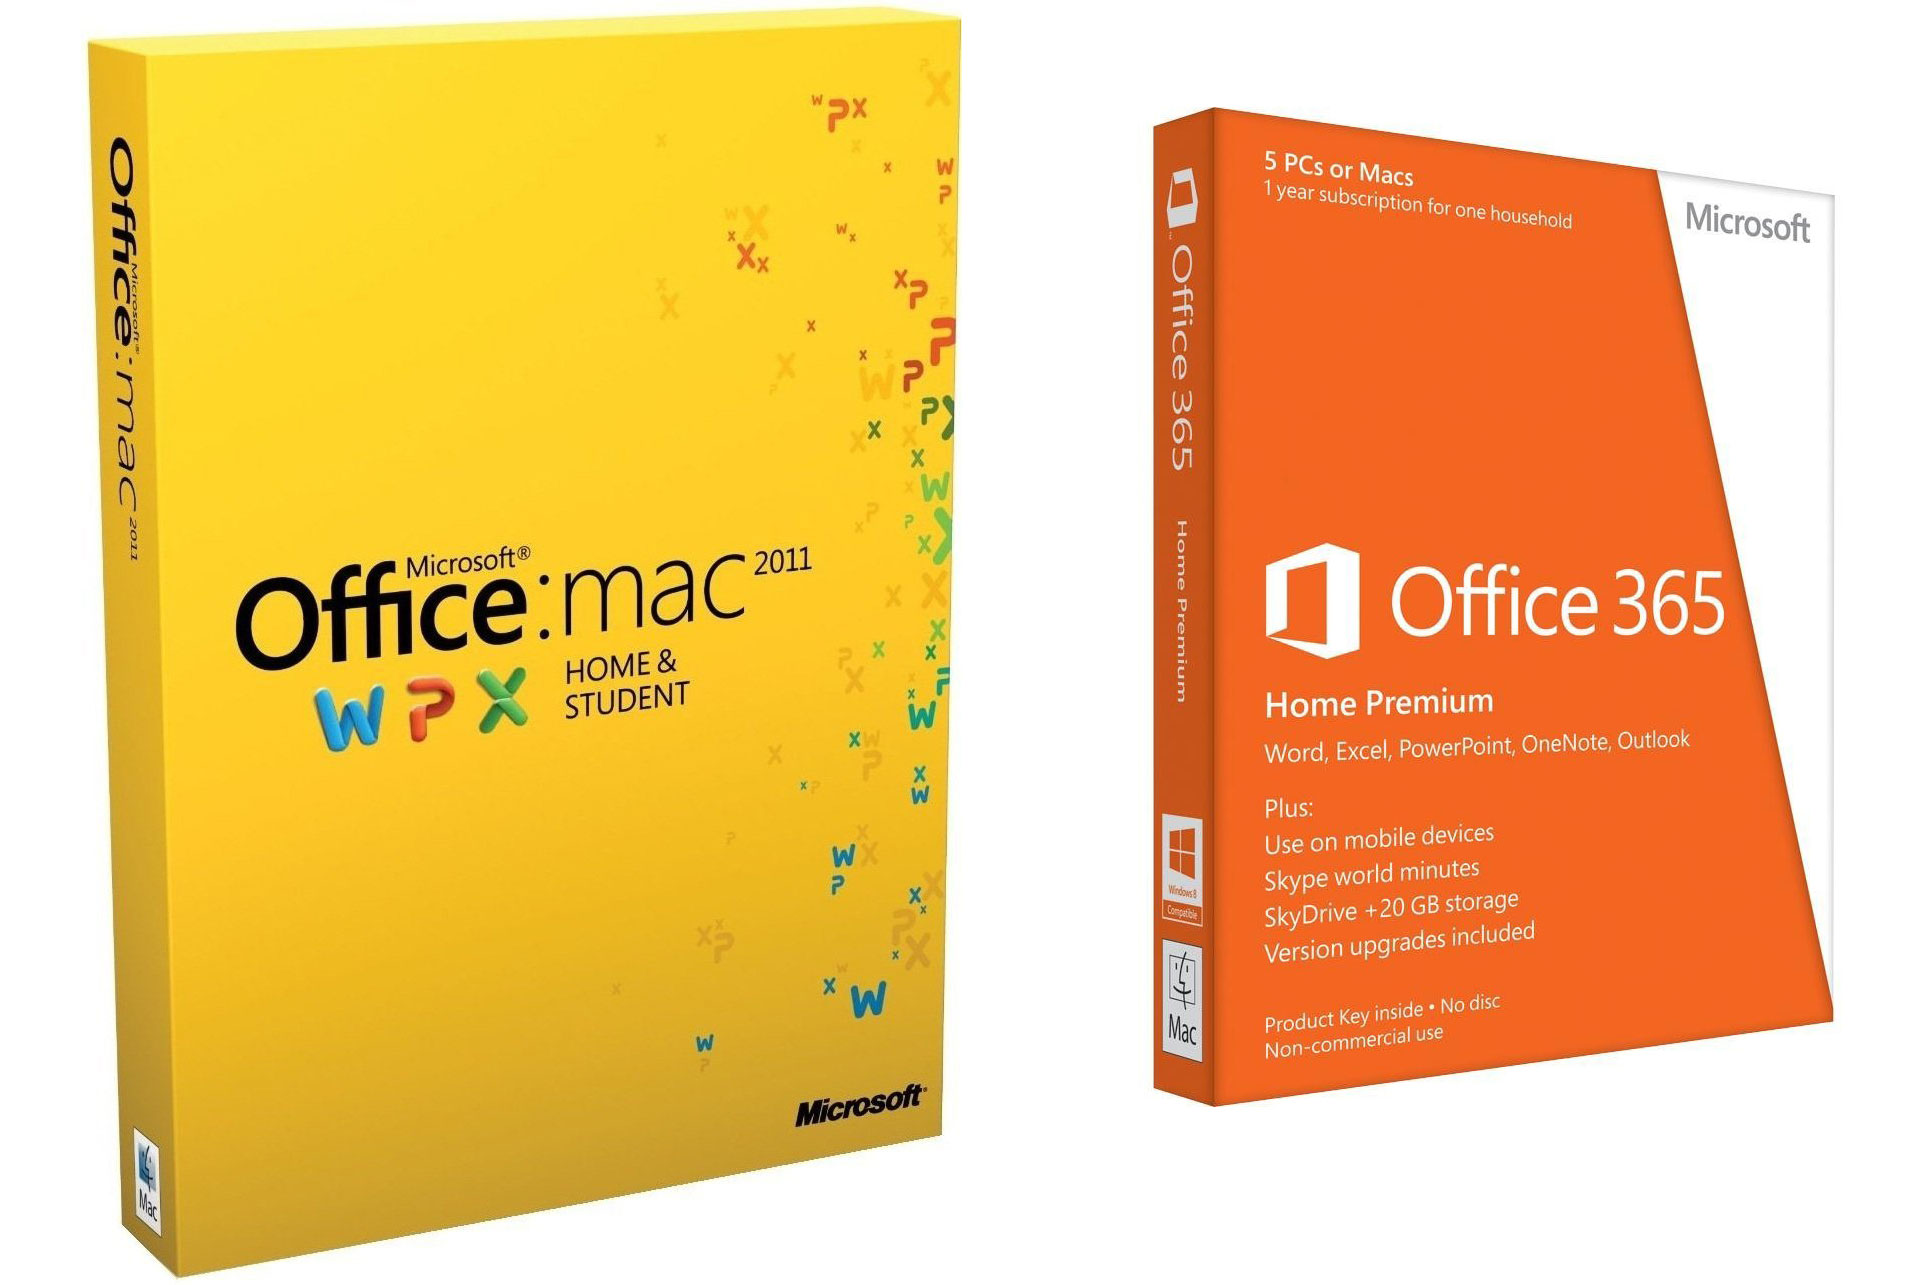 New Office for Mac 2014 rumors point to news and a release near an Office for iPad announcement.